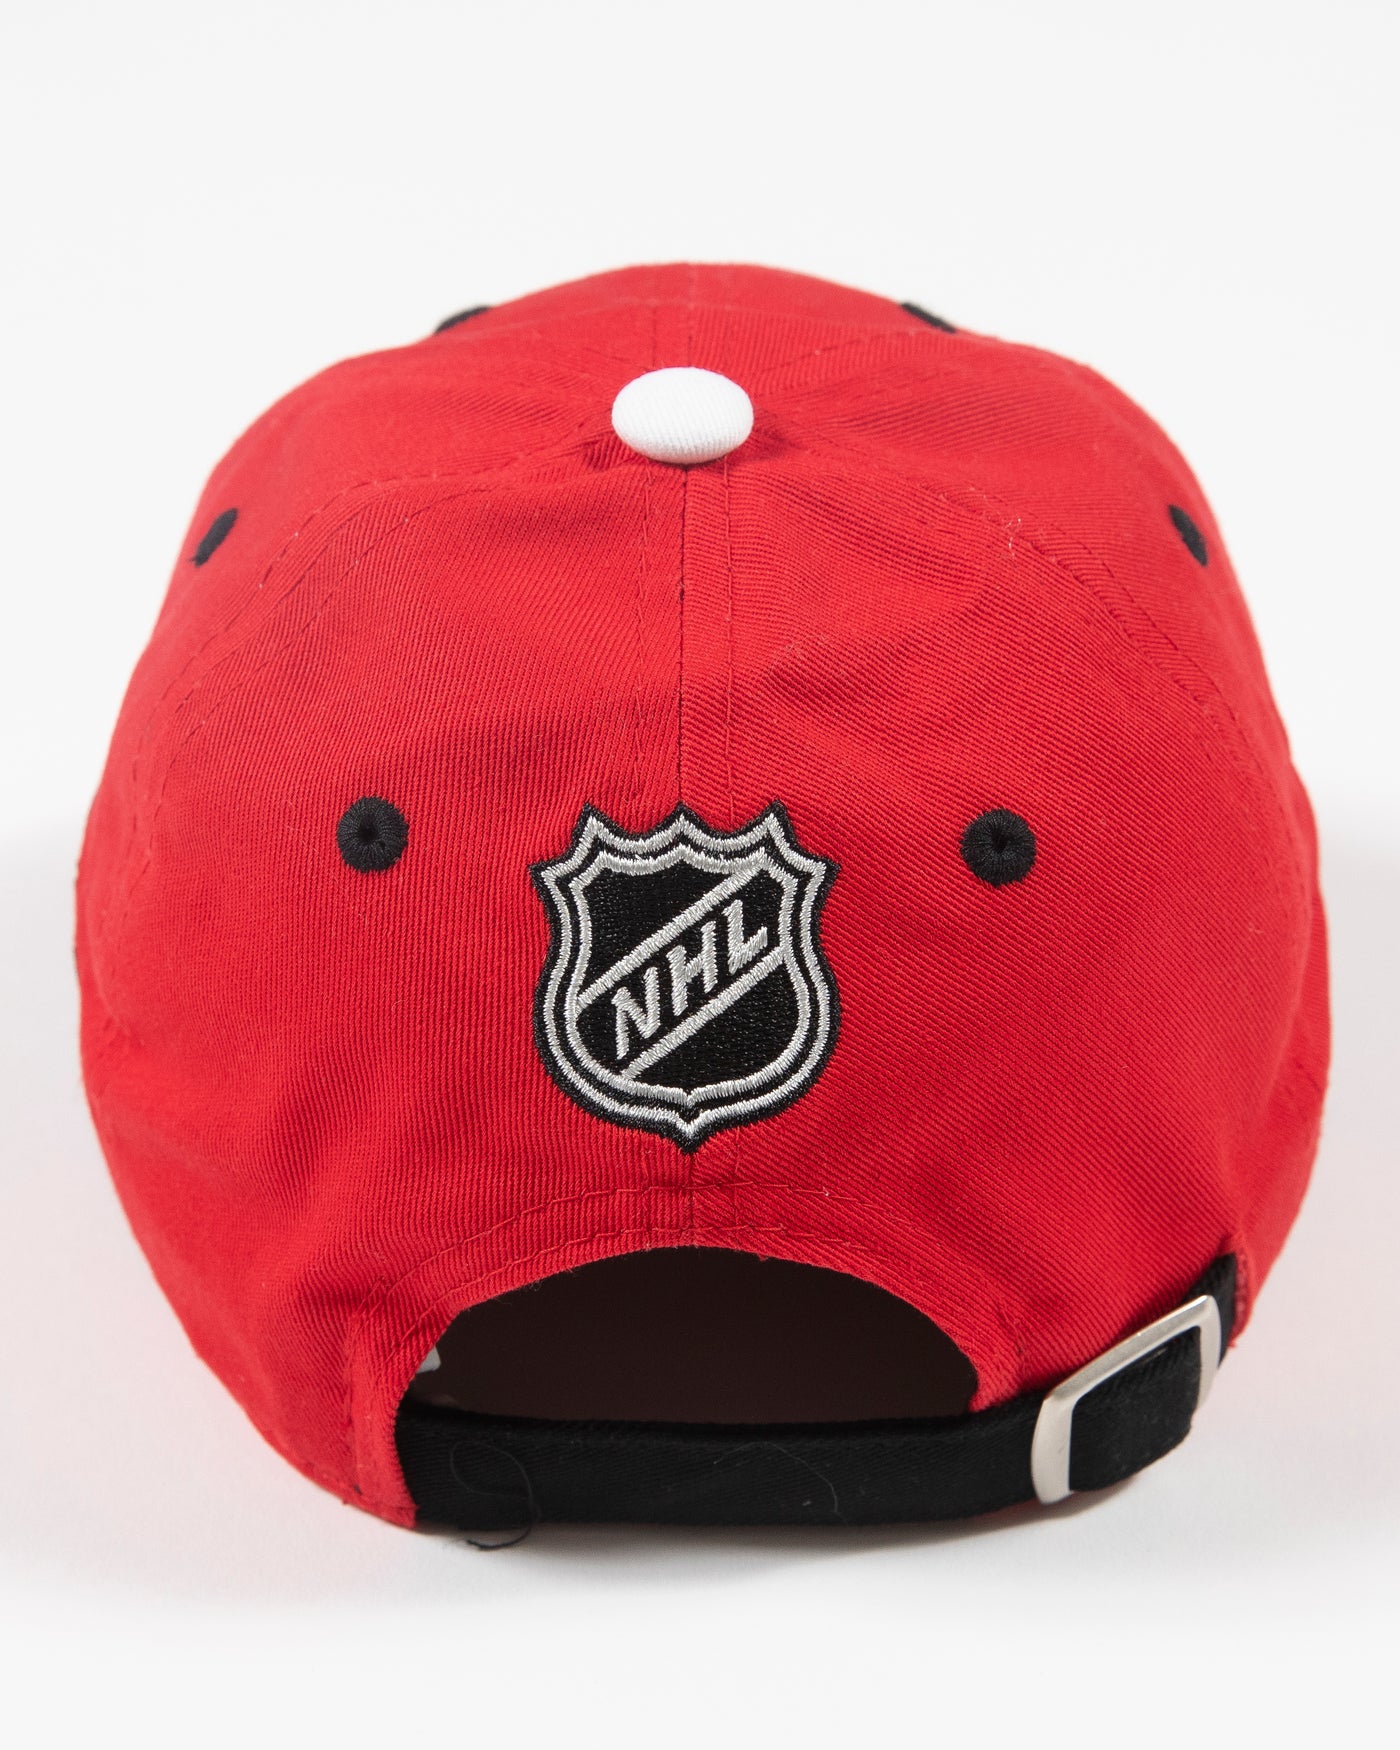 red Outerstuff Chicago Blackhawks adjustable youth cap - back lay flat